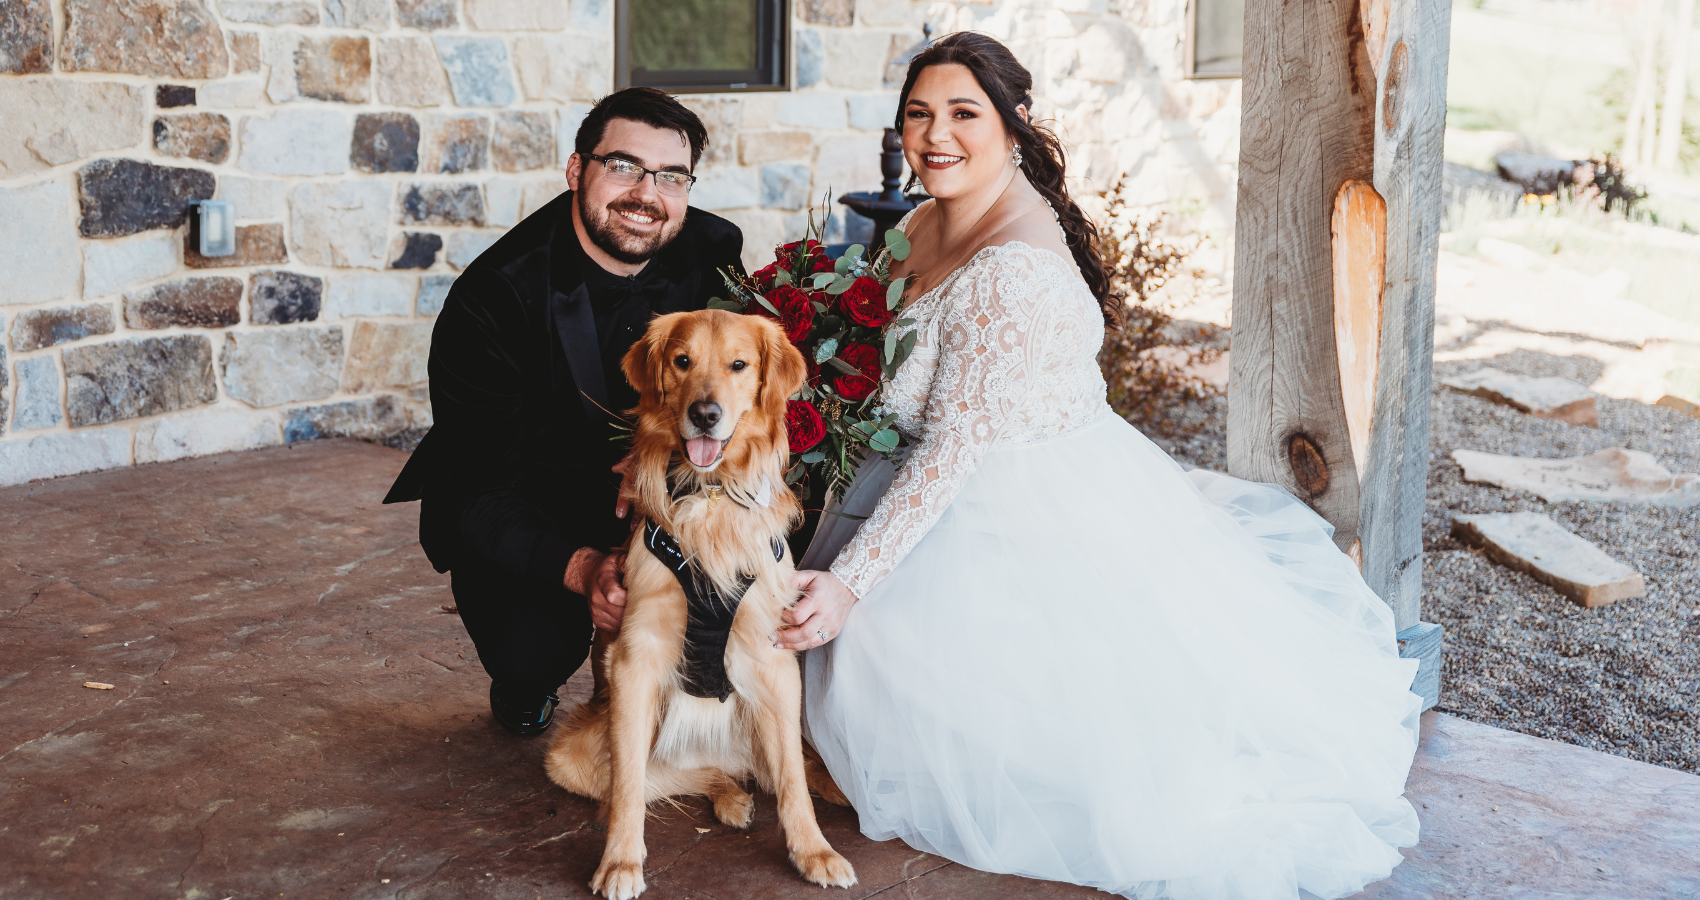 Bride In Lace Wedding Dress Called Mallory Dawn By Maggie Sottero With Dog Wedding Ideas